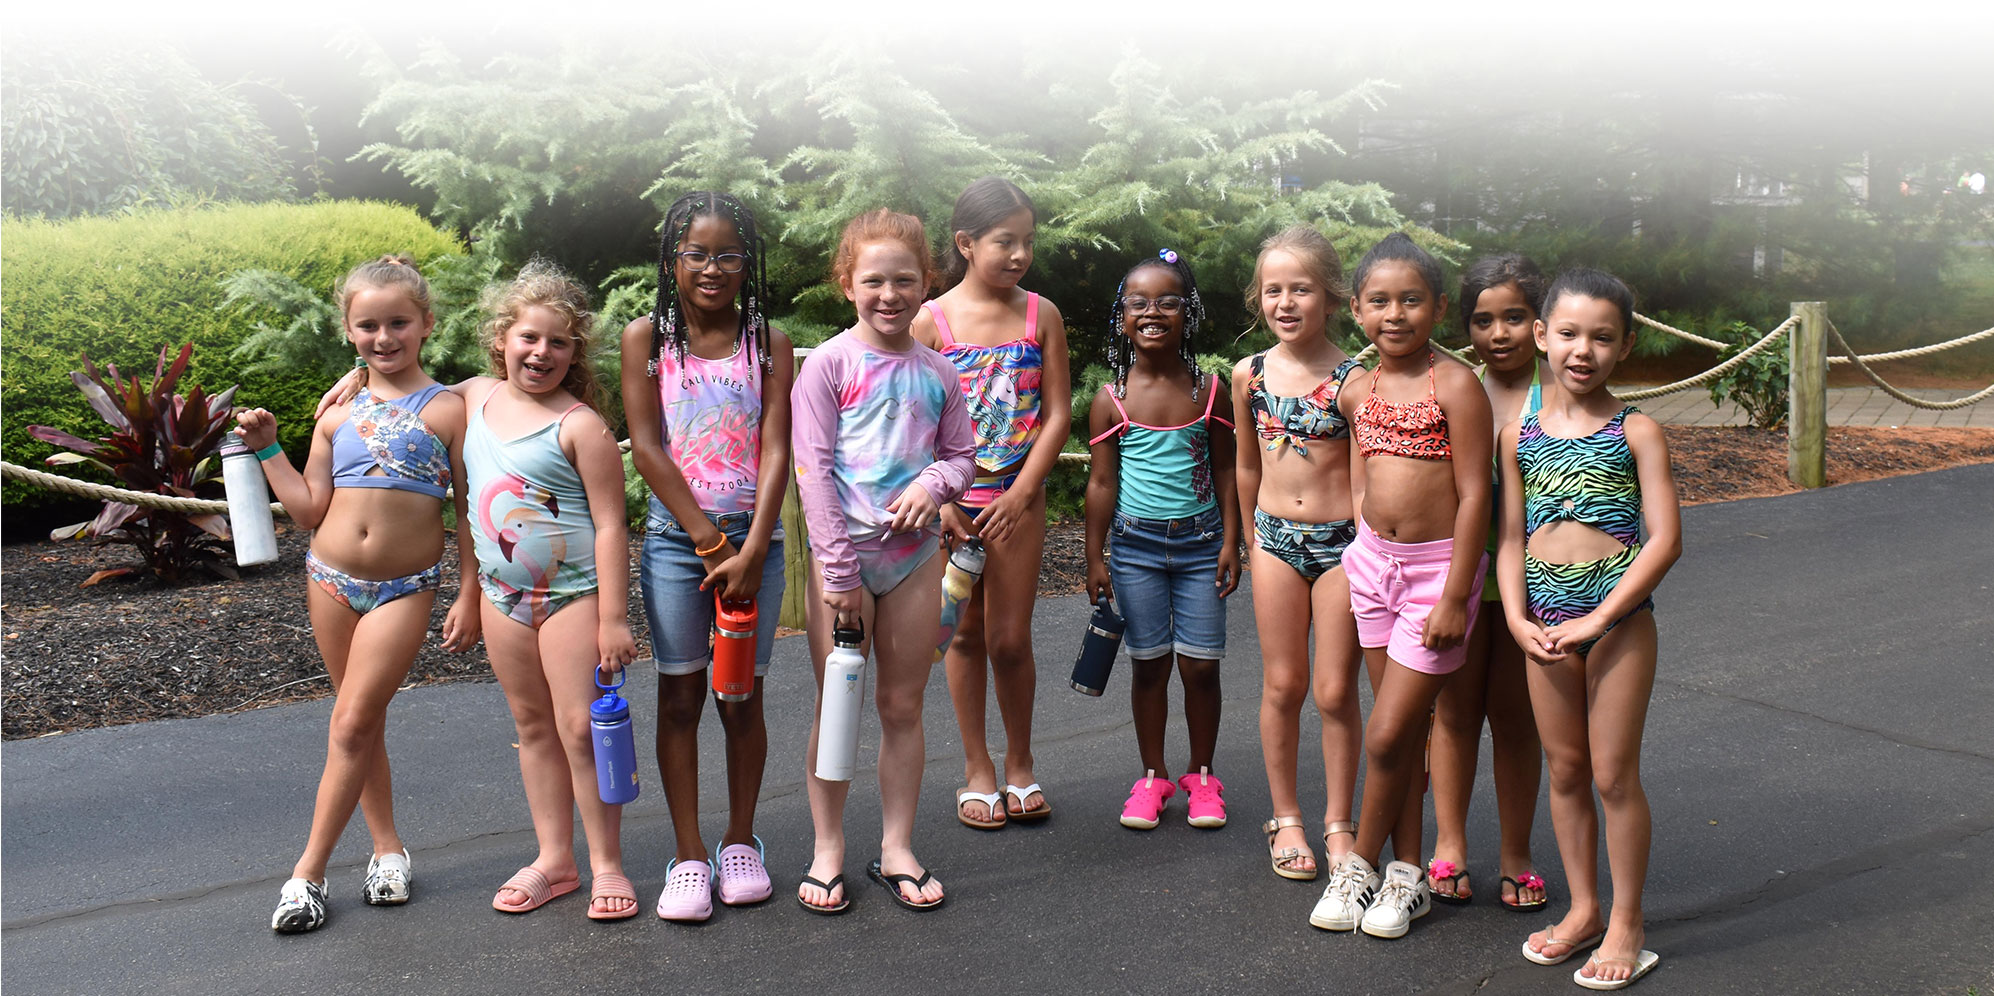 Premier Summer Day Camp in New Jersey